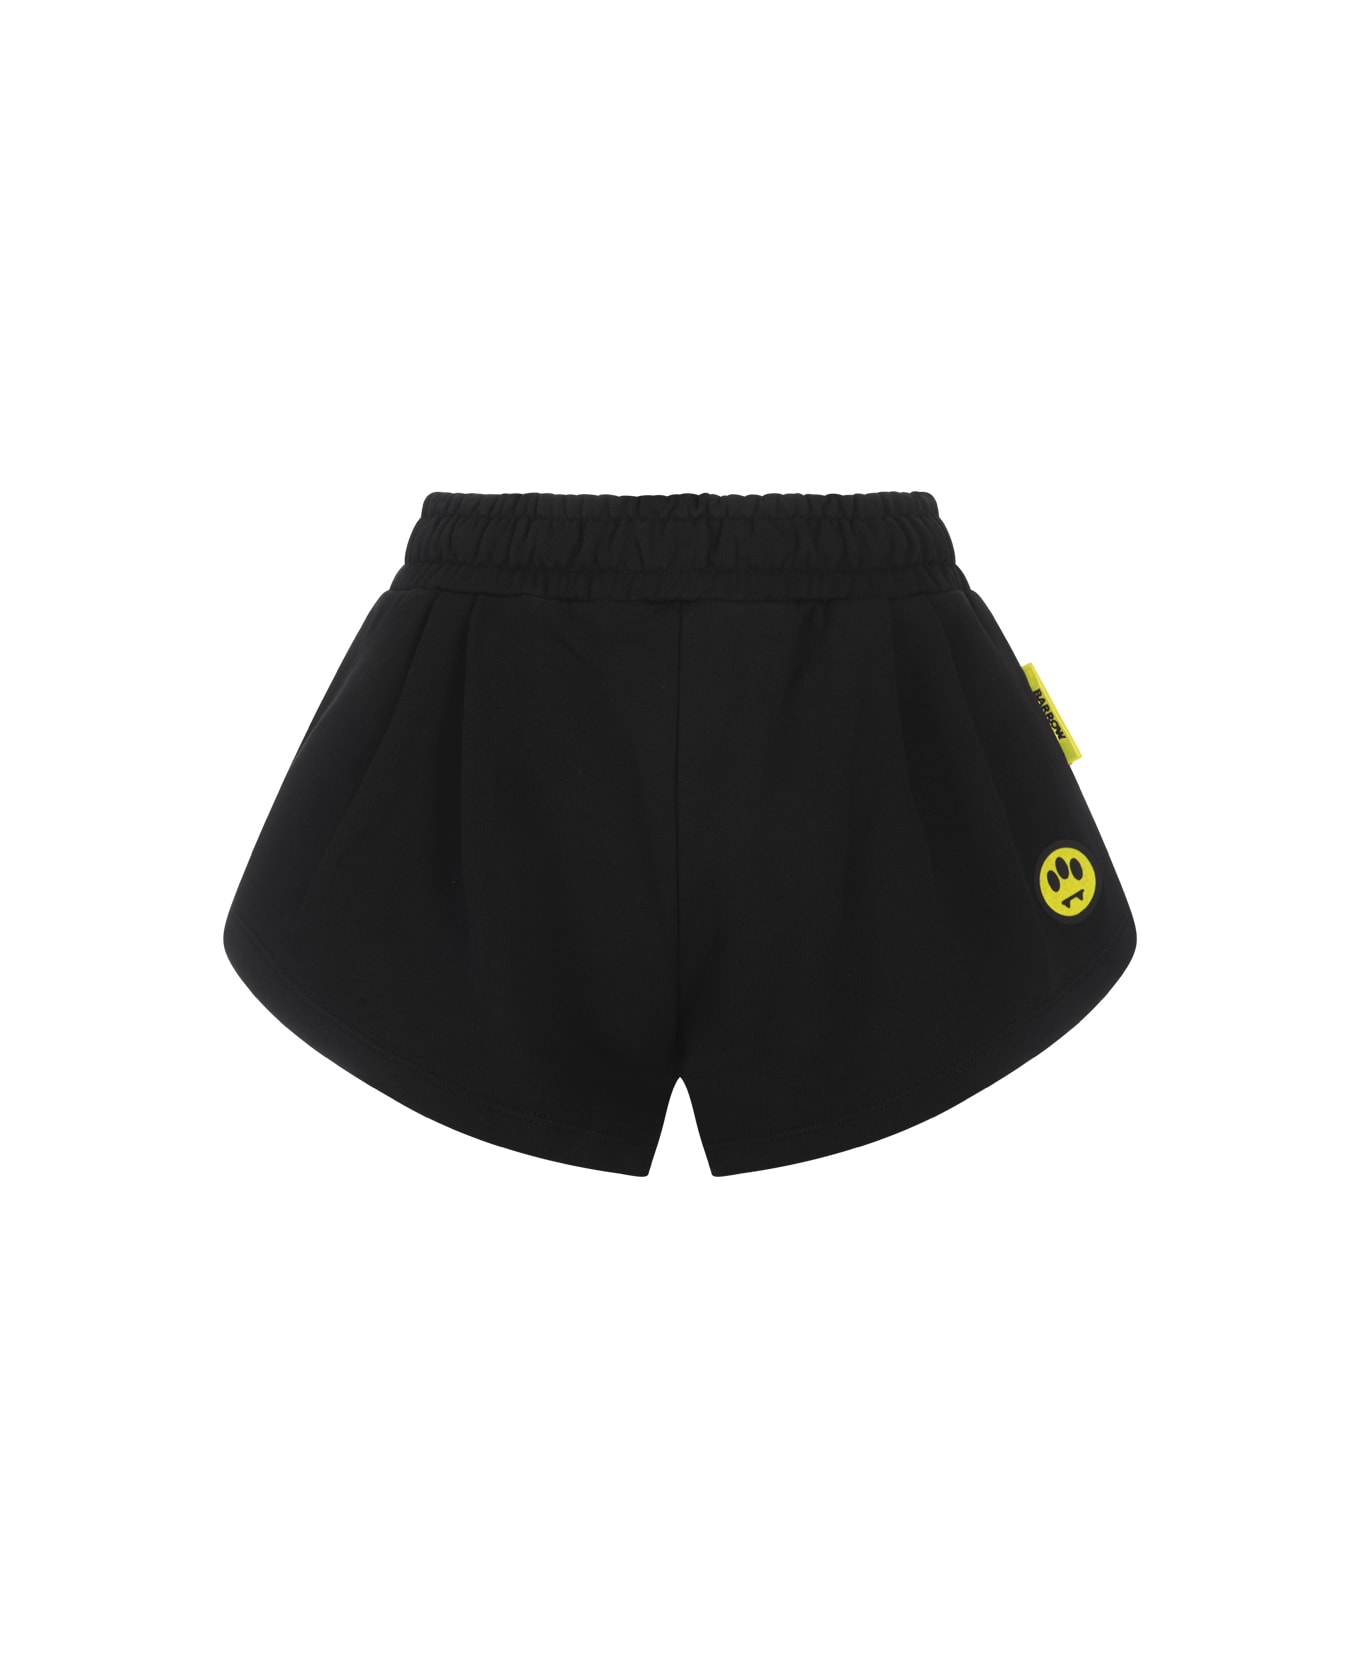 Barrow Black Crop Shorts With Smile Patch - Black ボトムス